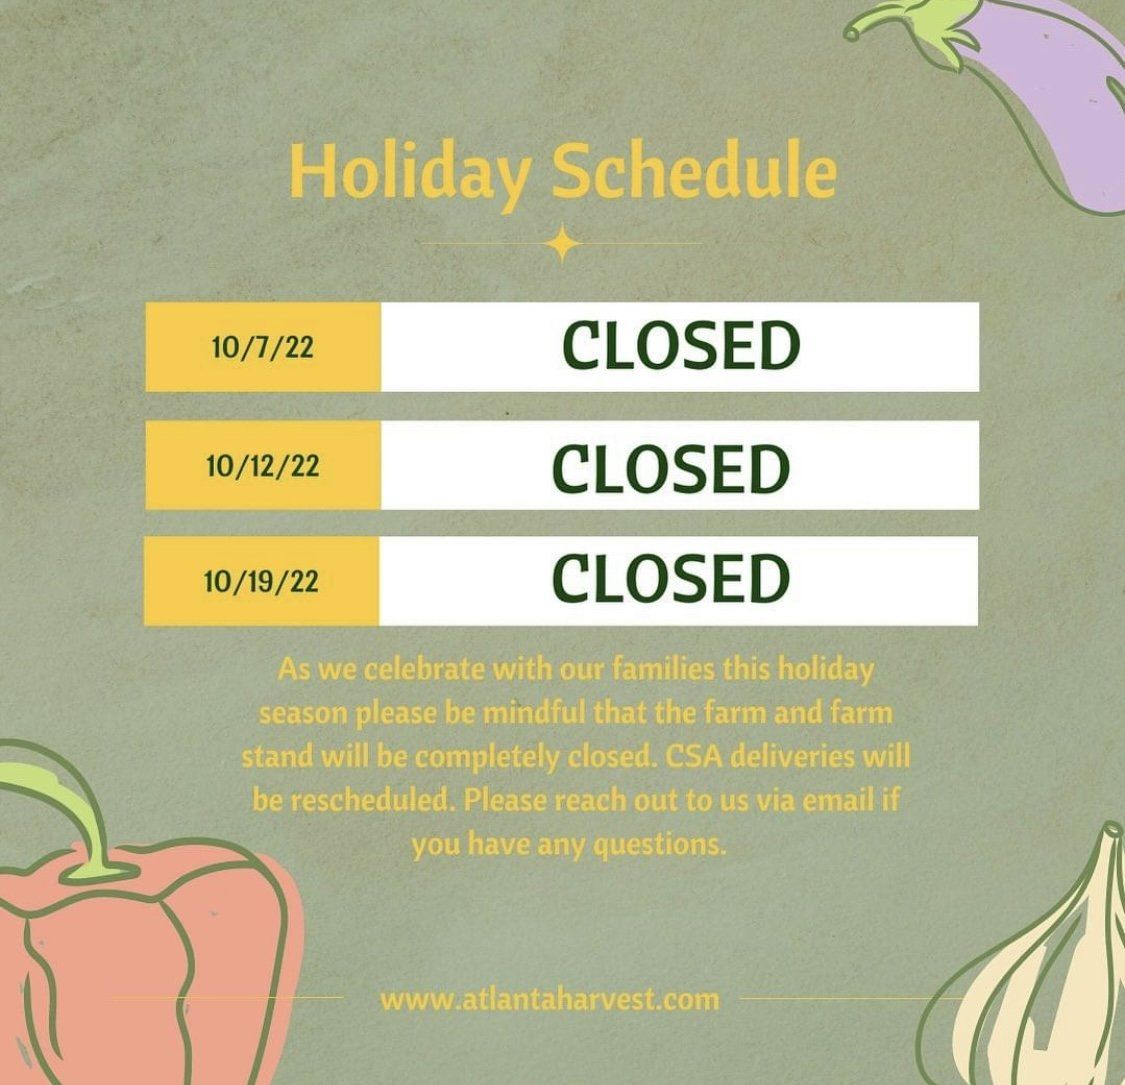 Previous Happening: Holiday Schedule